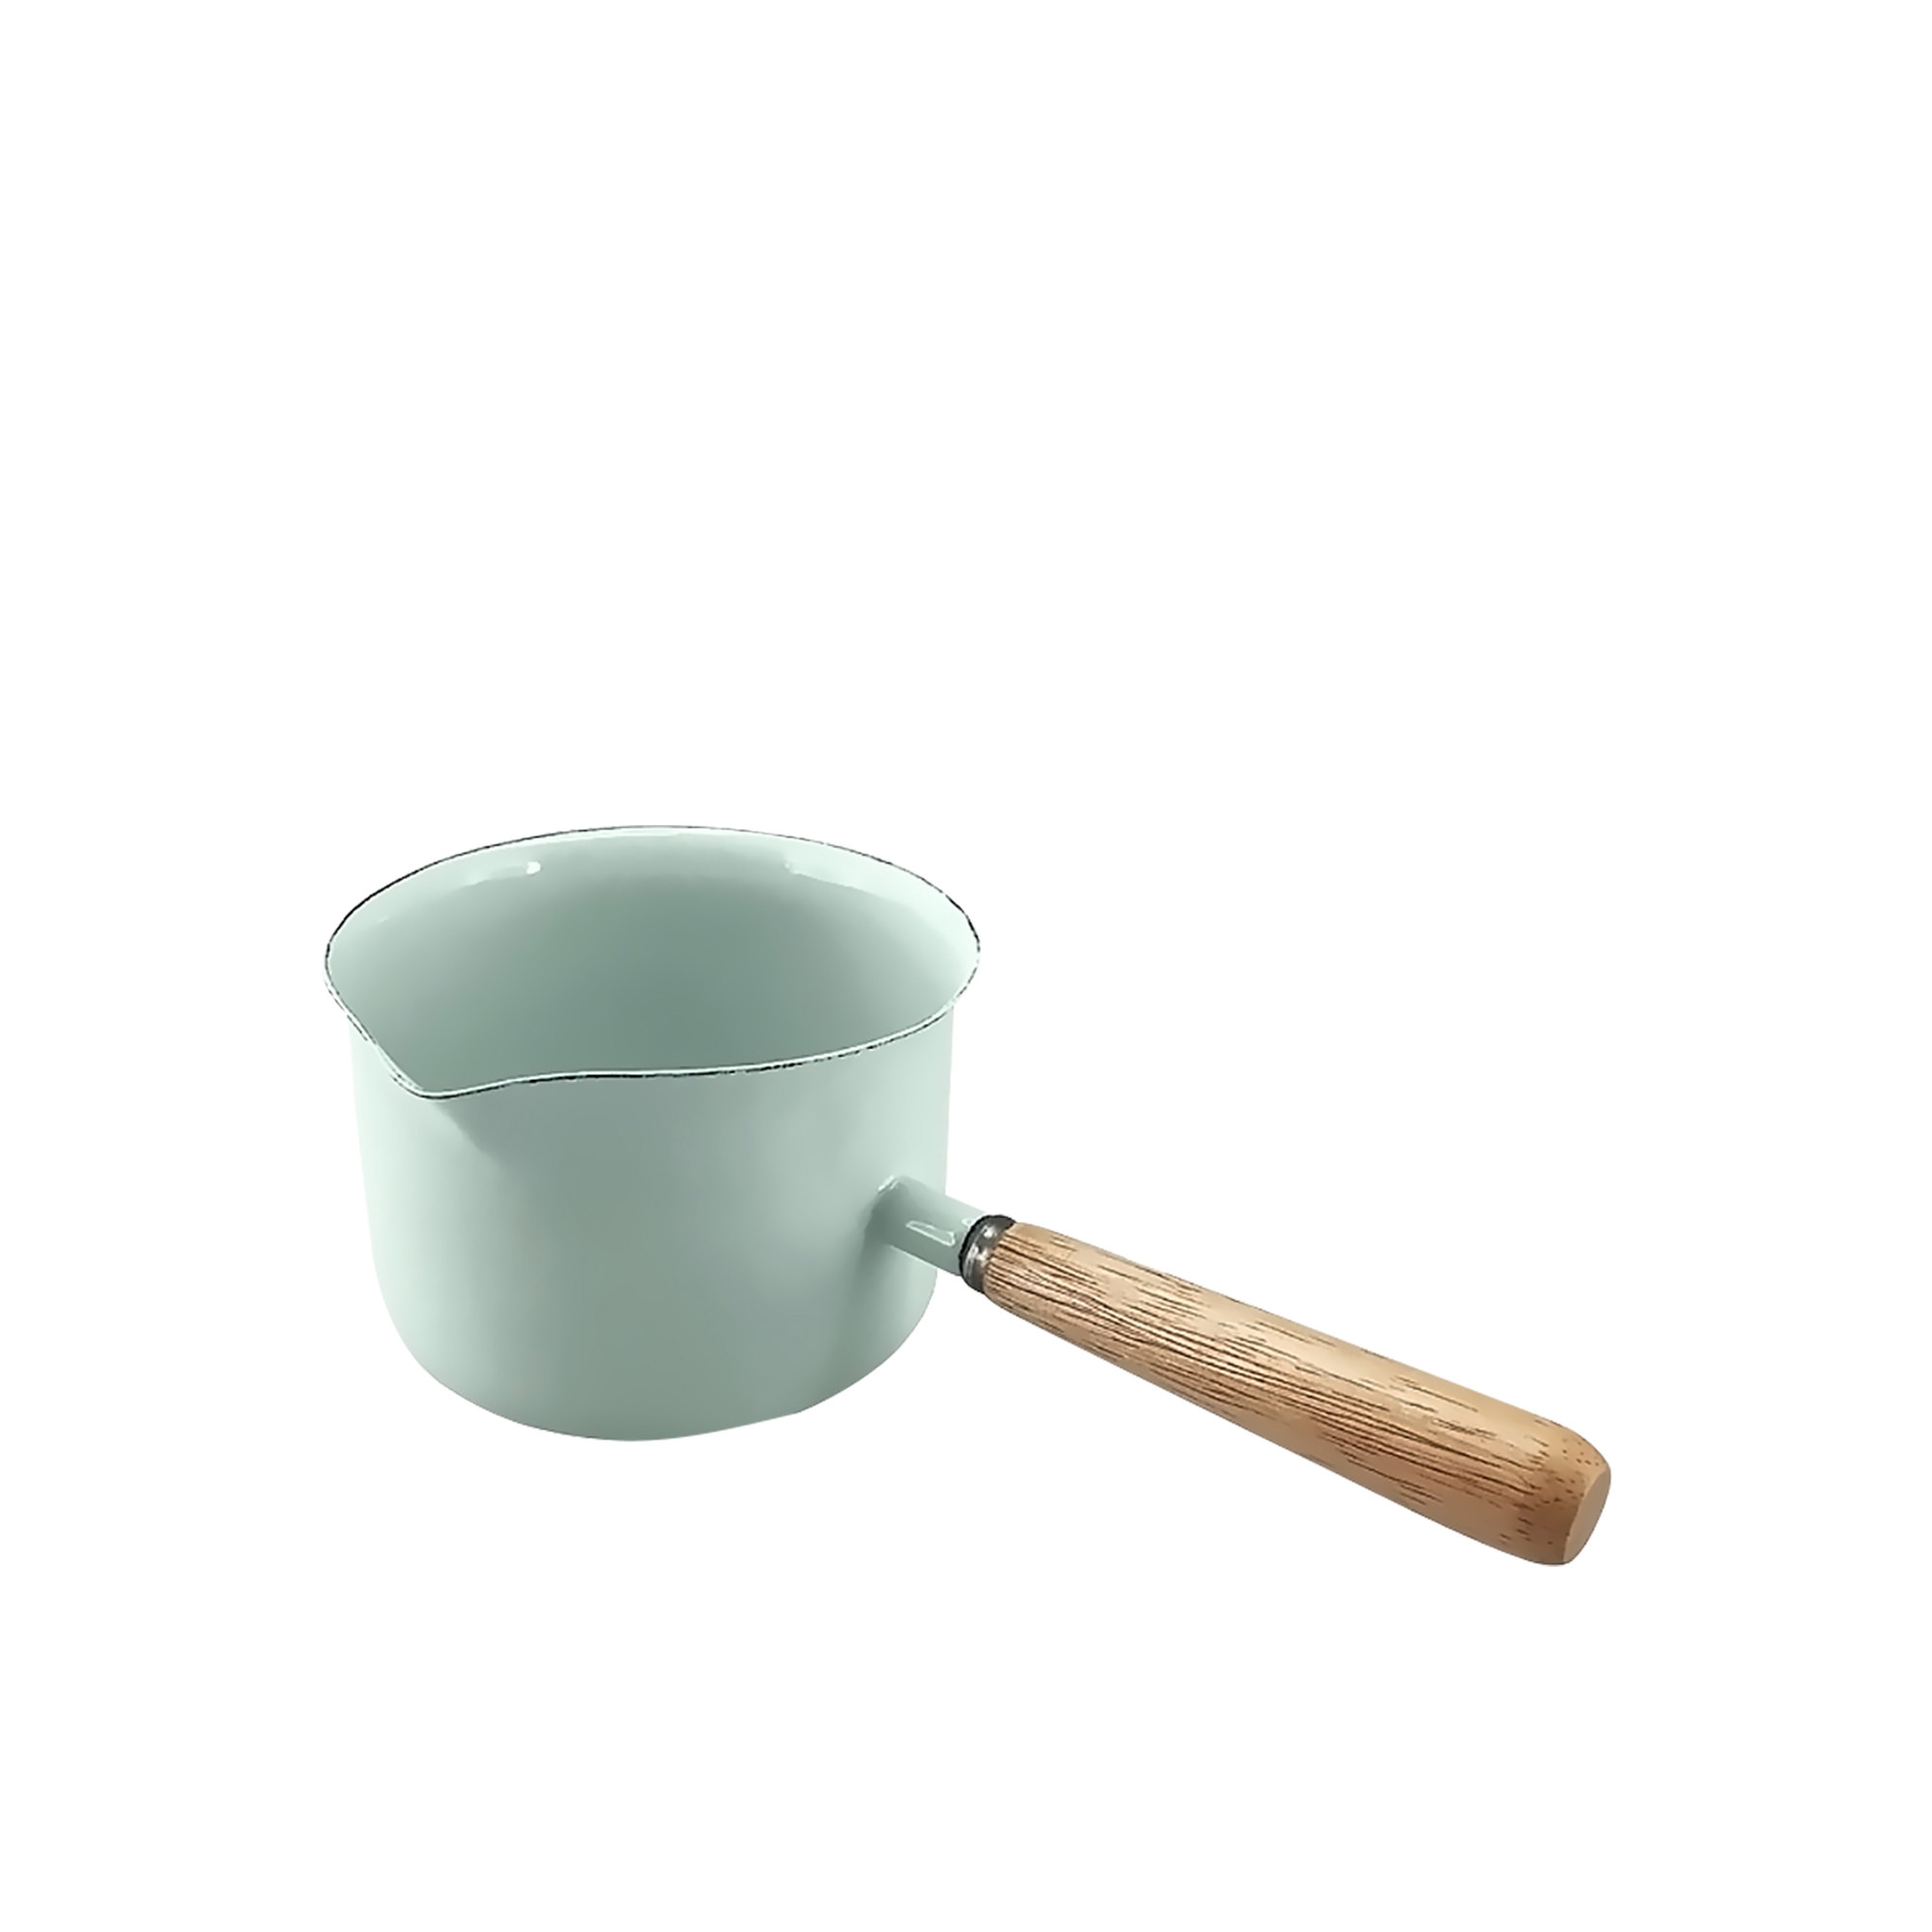 Falcon Enamelware Butter Warmer with Wood Handle 400ml Duck Egg Blue Image 1